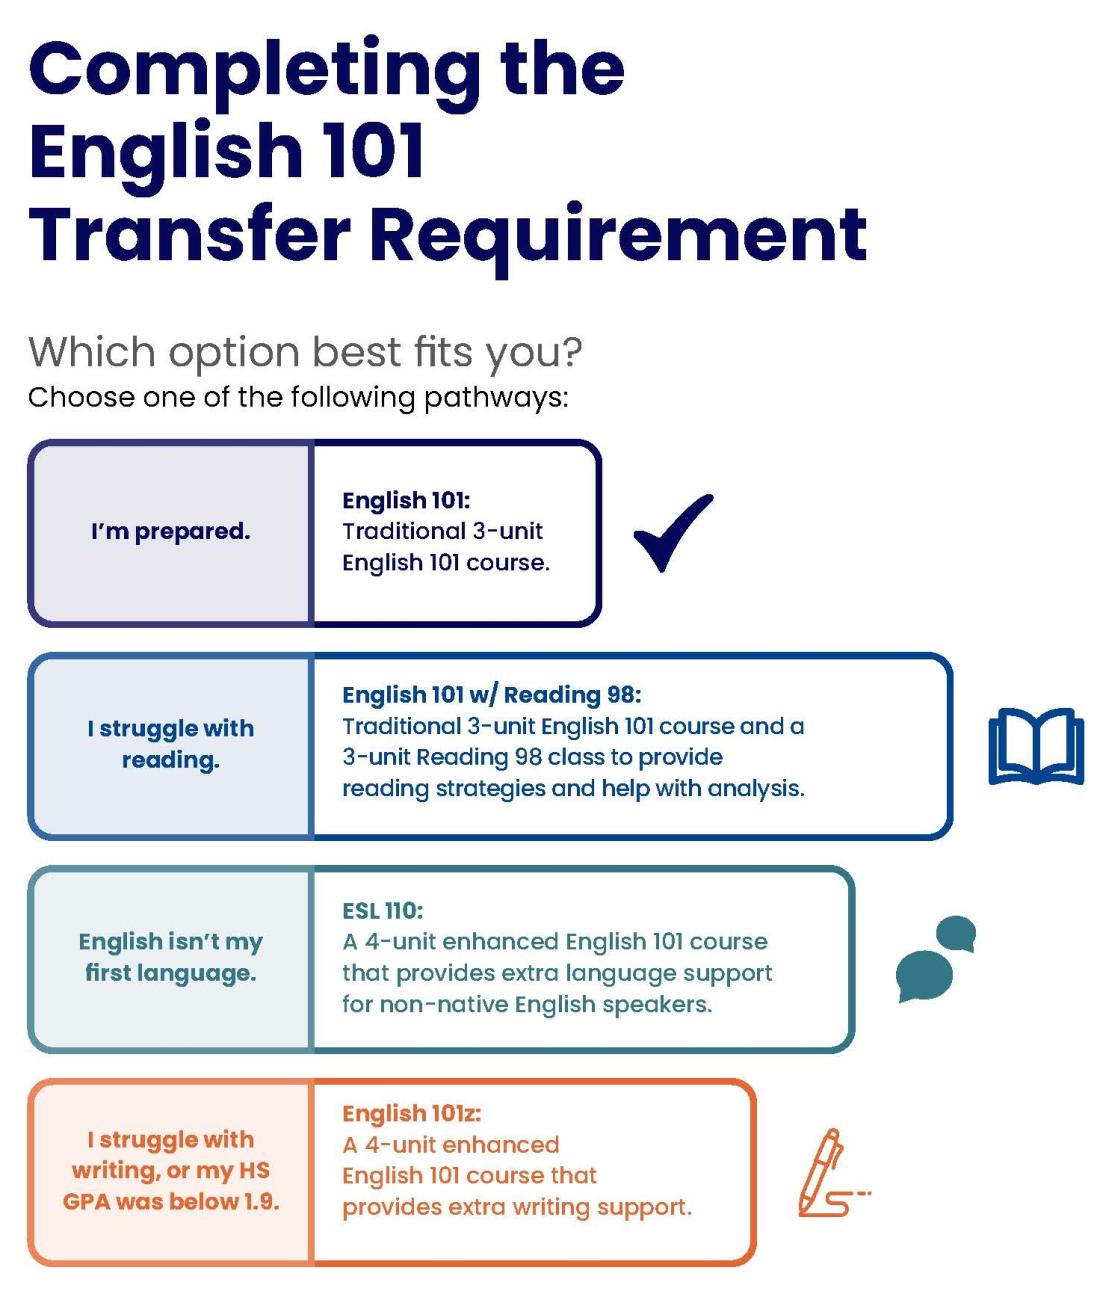 Completing the English 101 Transfer Requirement